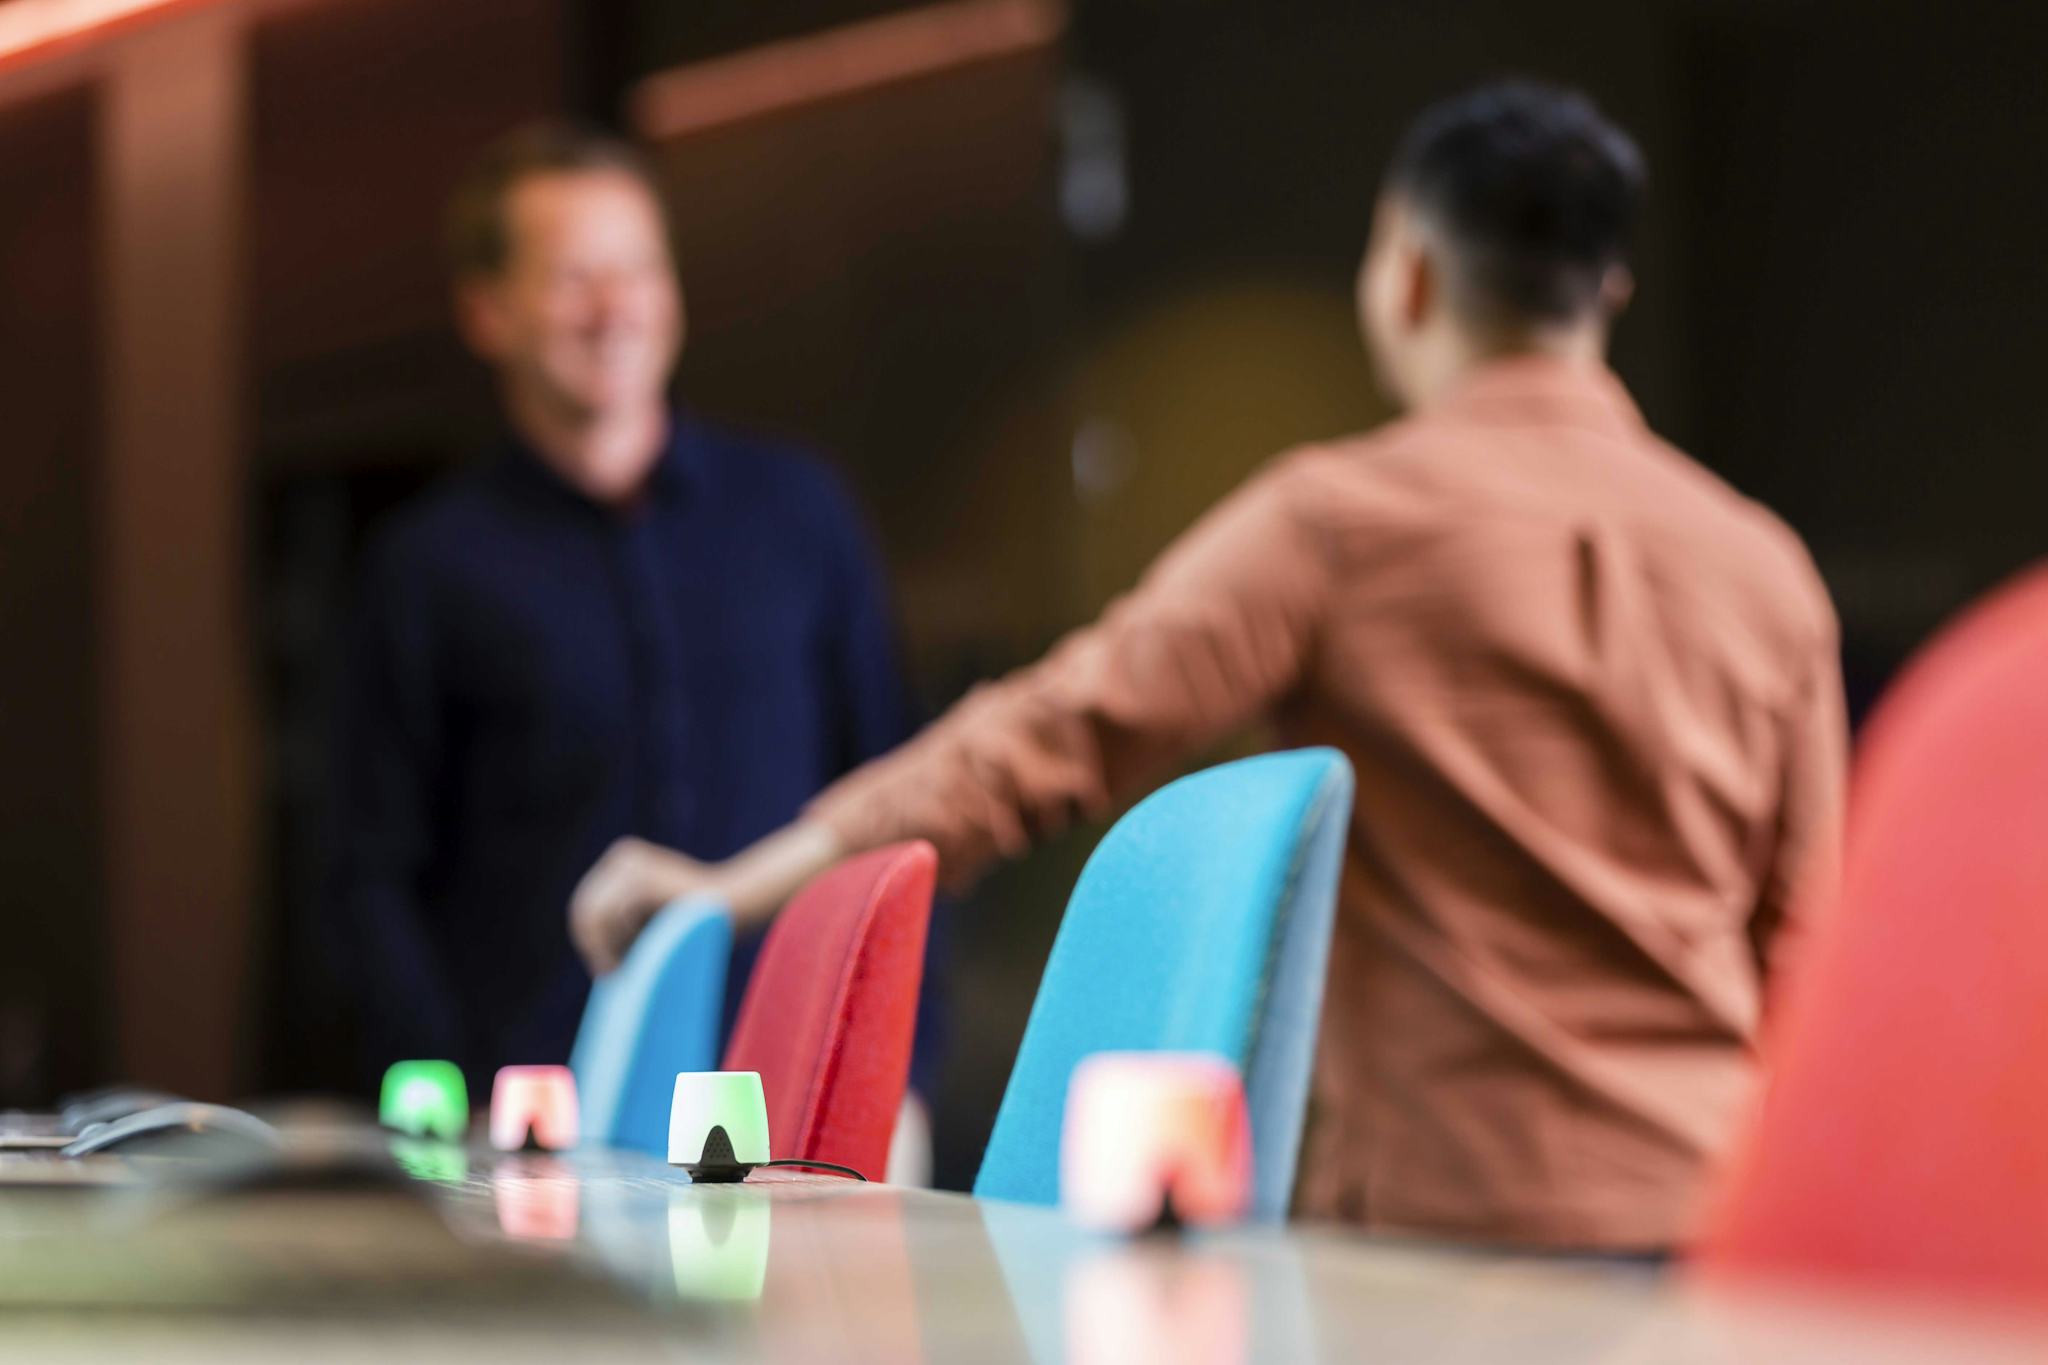 People chatting in the background in front of desks where busy lughts are displayed, showing the desks availability through color indication. 